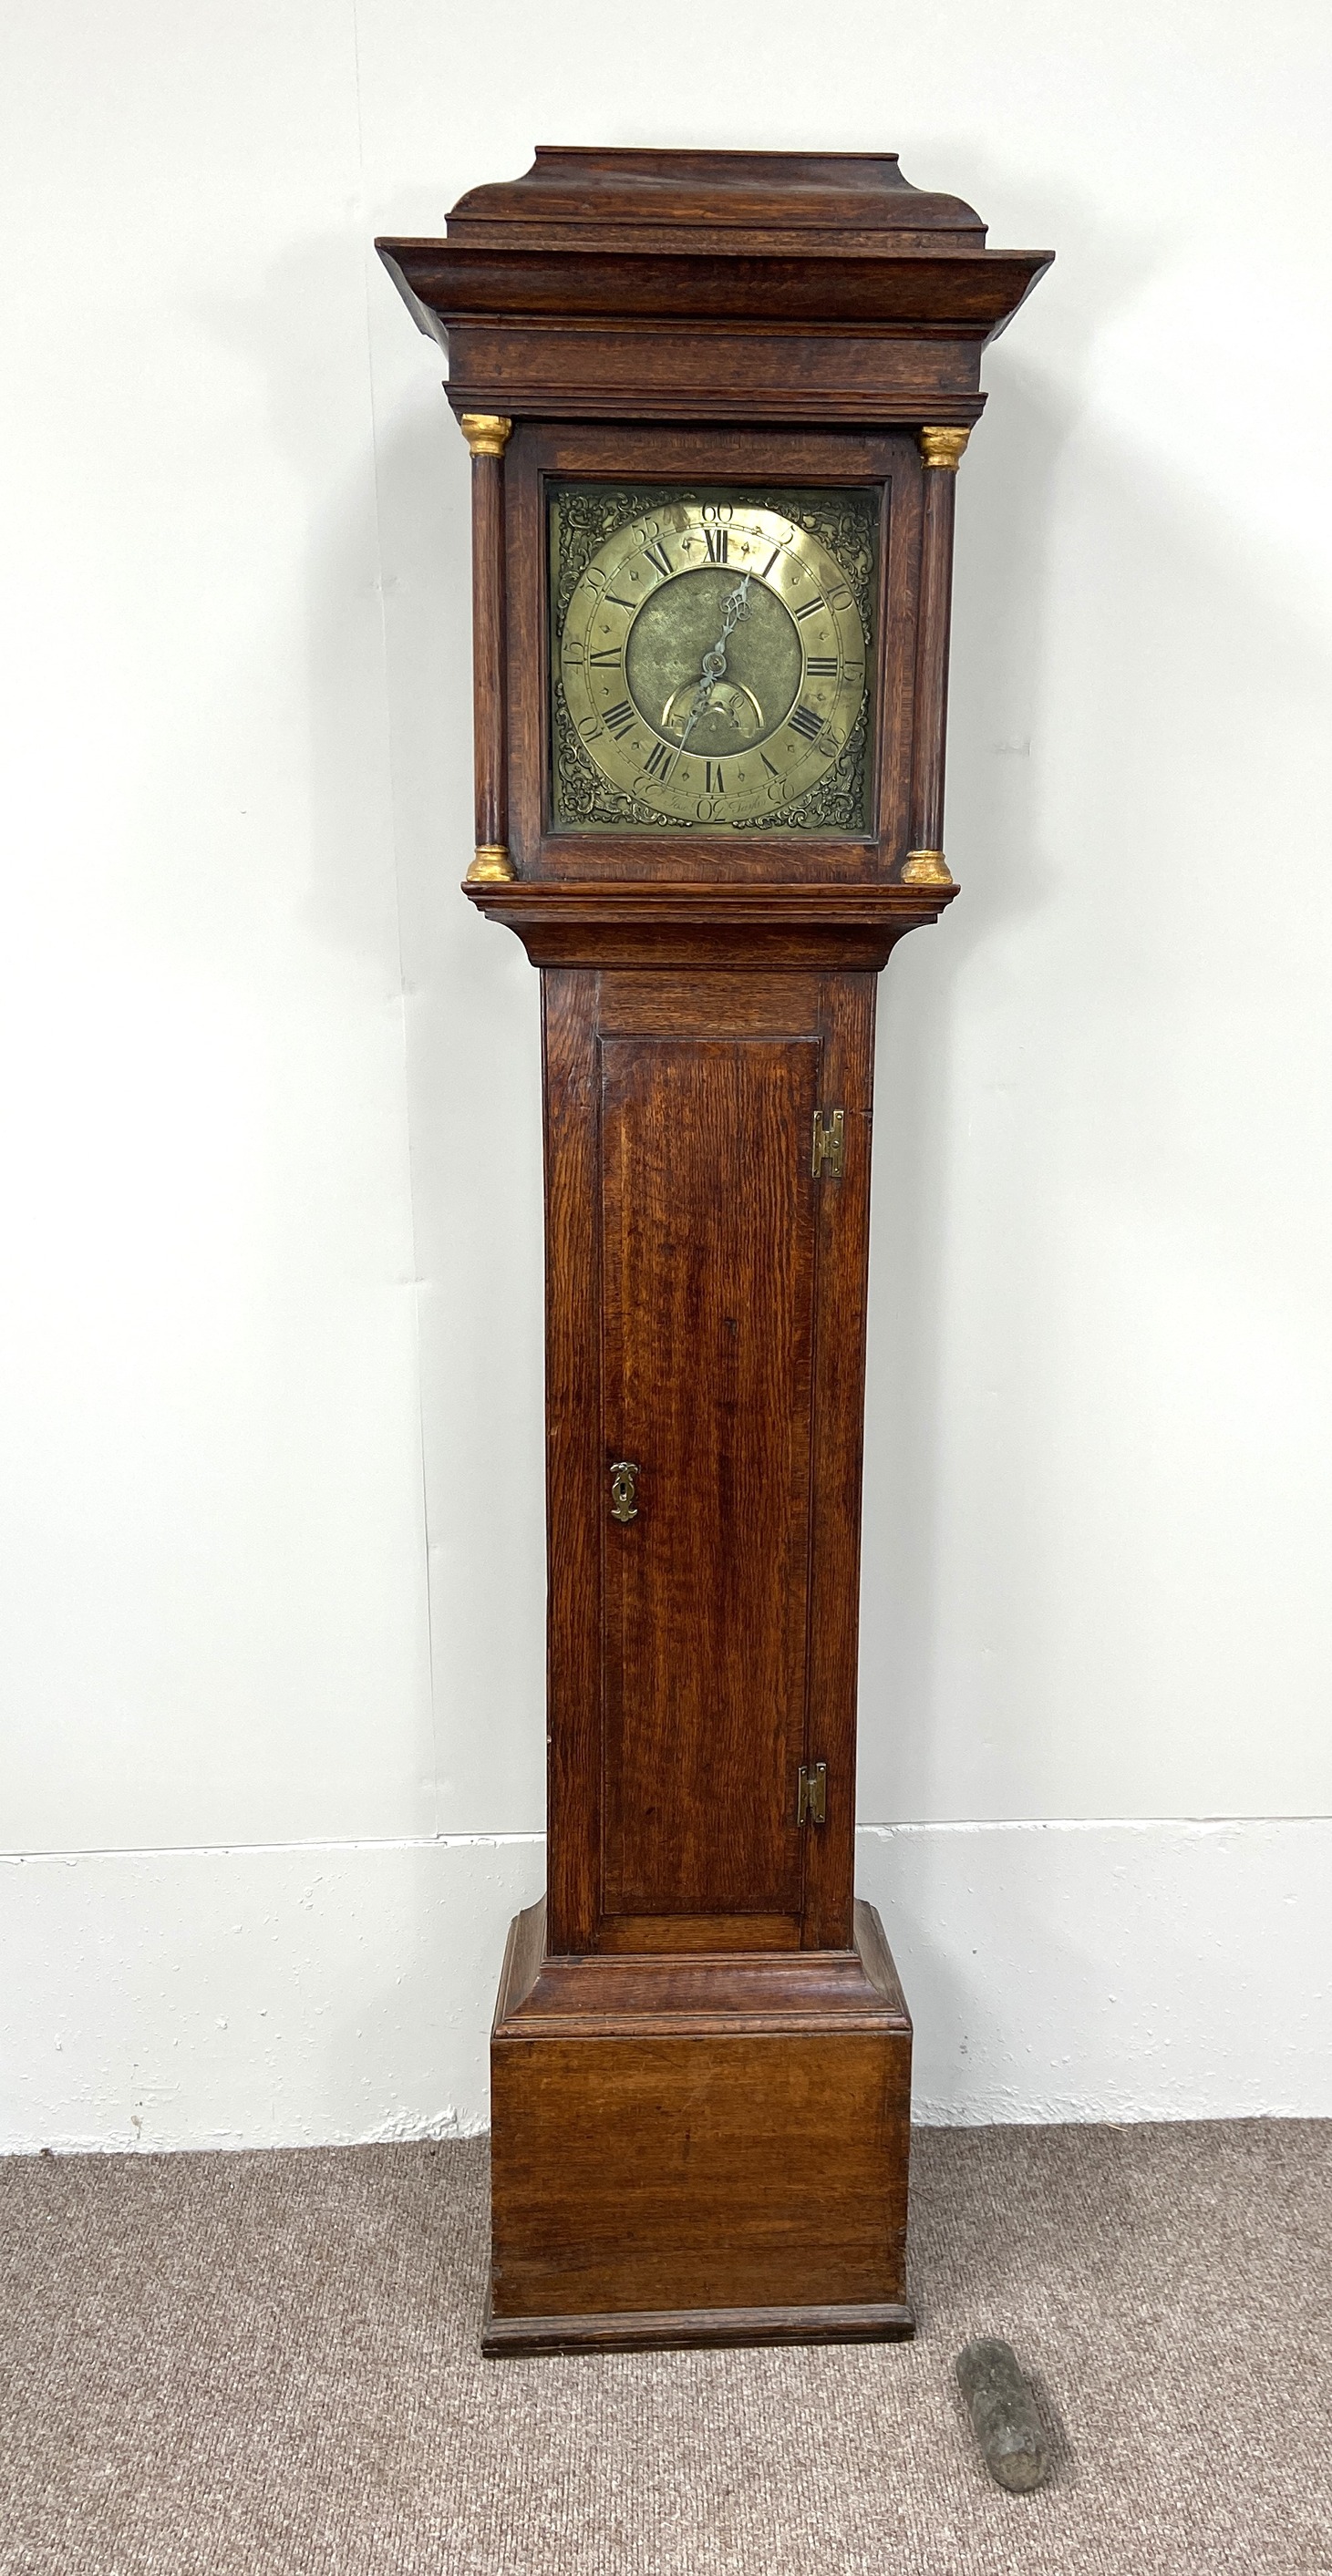 An early 18th century oak longcase clock, by Joseph Taylor, in an architectural provincial caddy